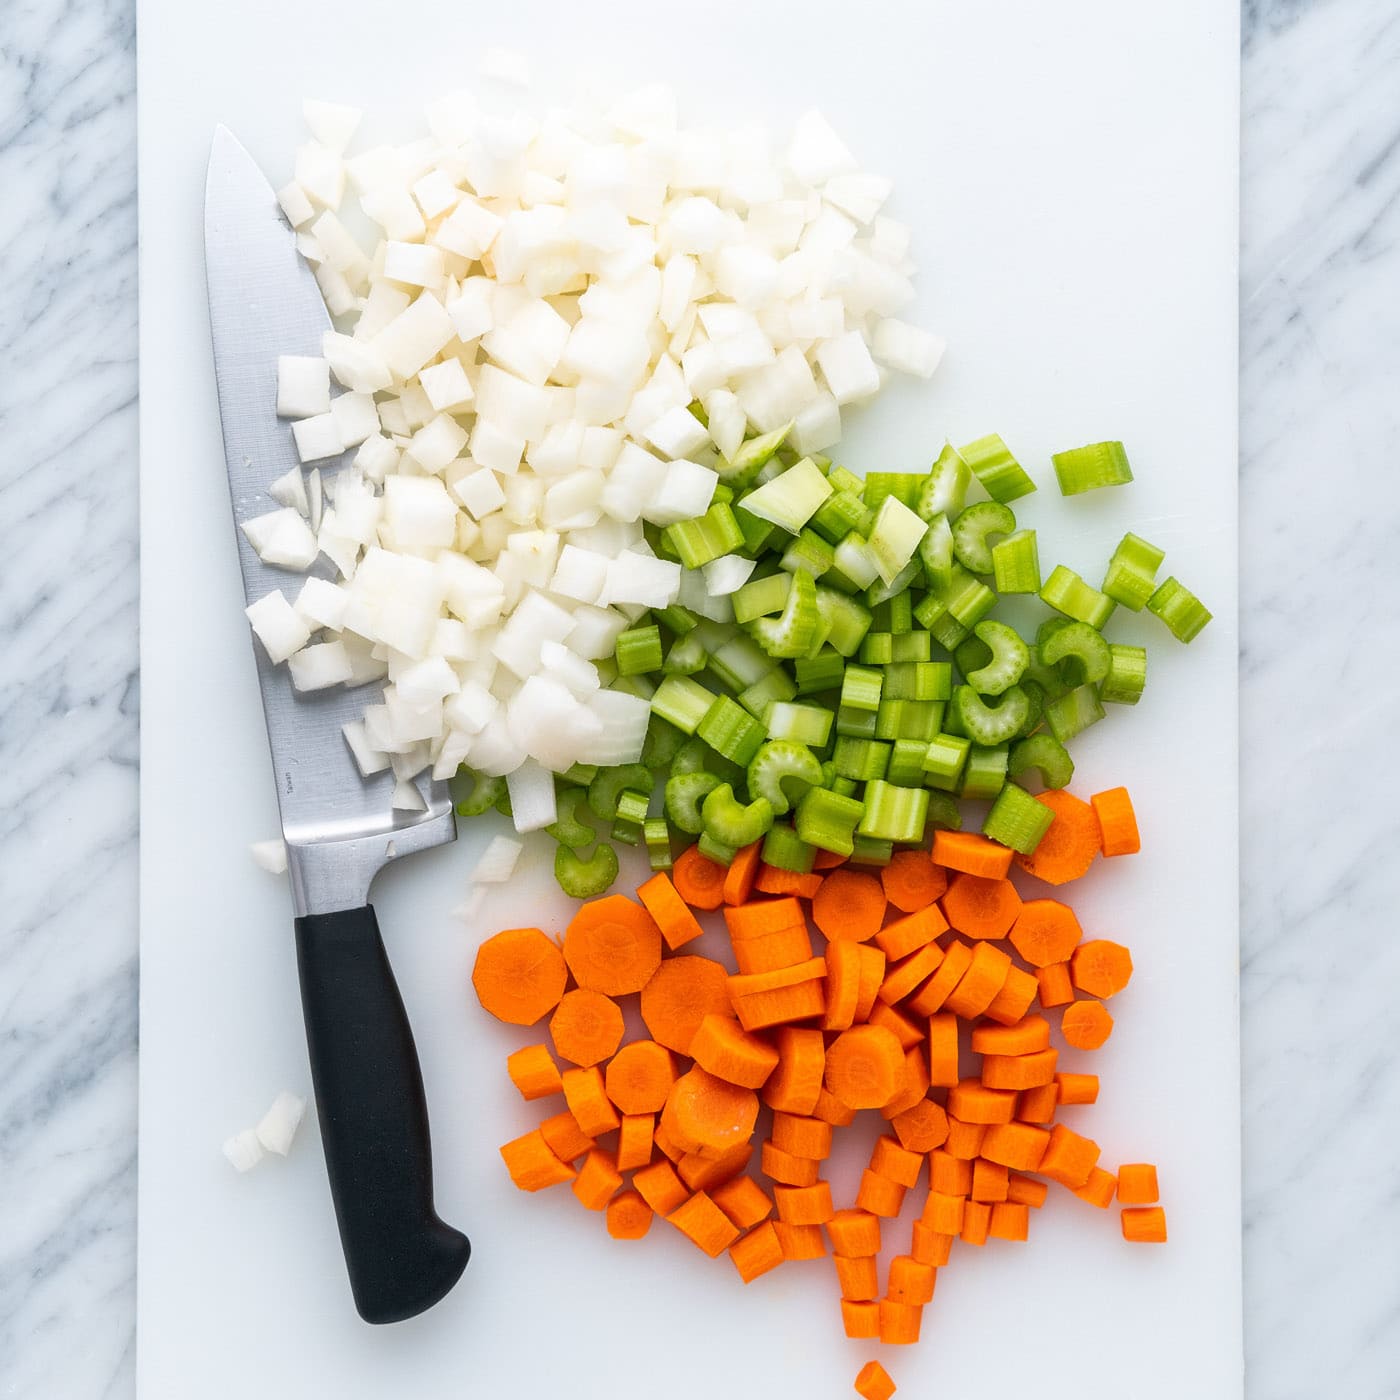 diced celery, onion, and carrots on a cutting board